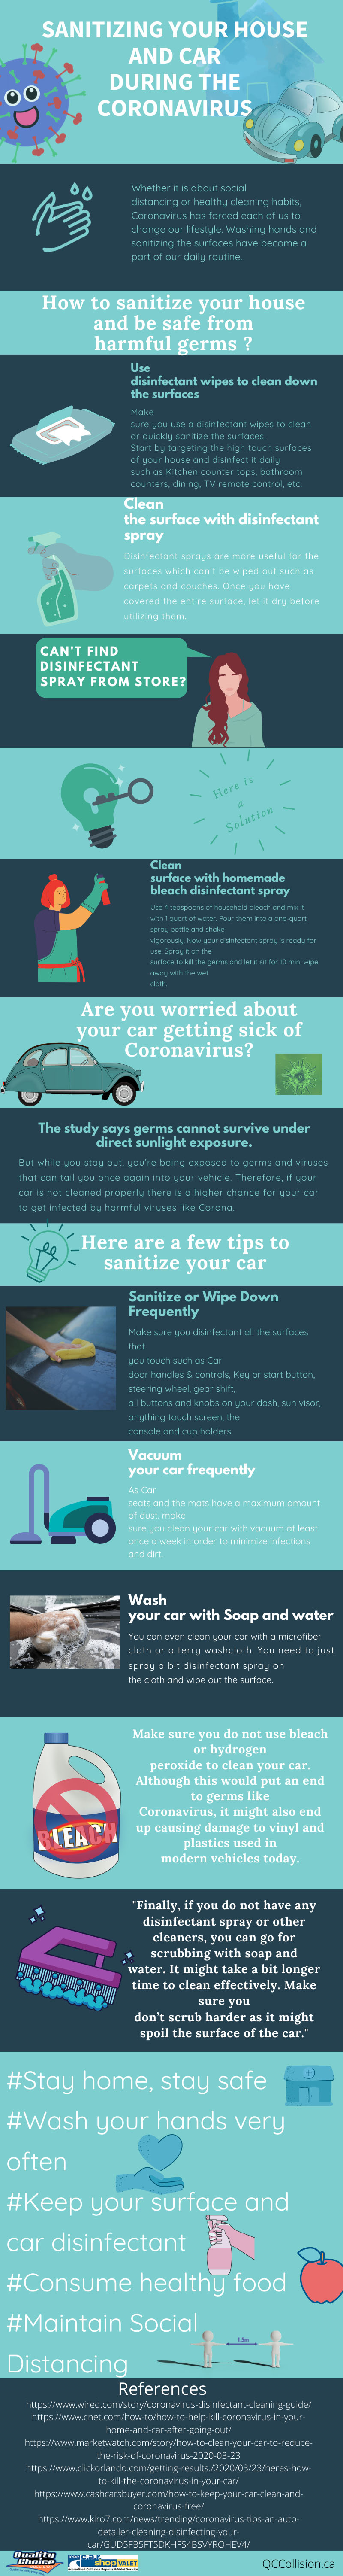 Sanitizing Your House and Car During the Coronavirus Outbreak